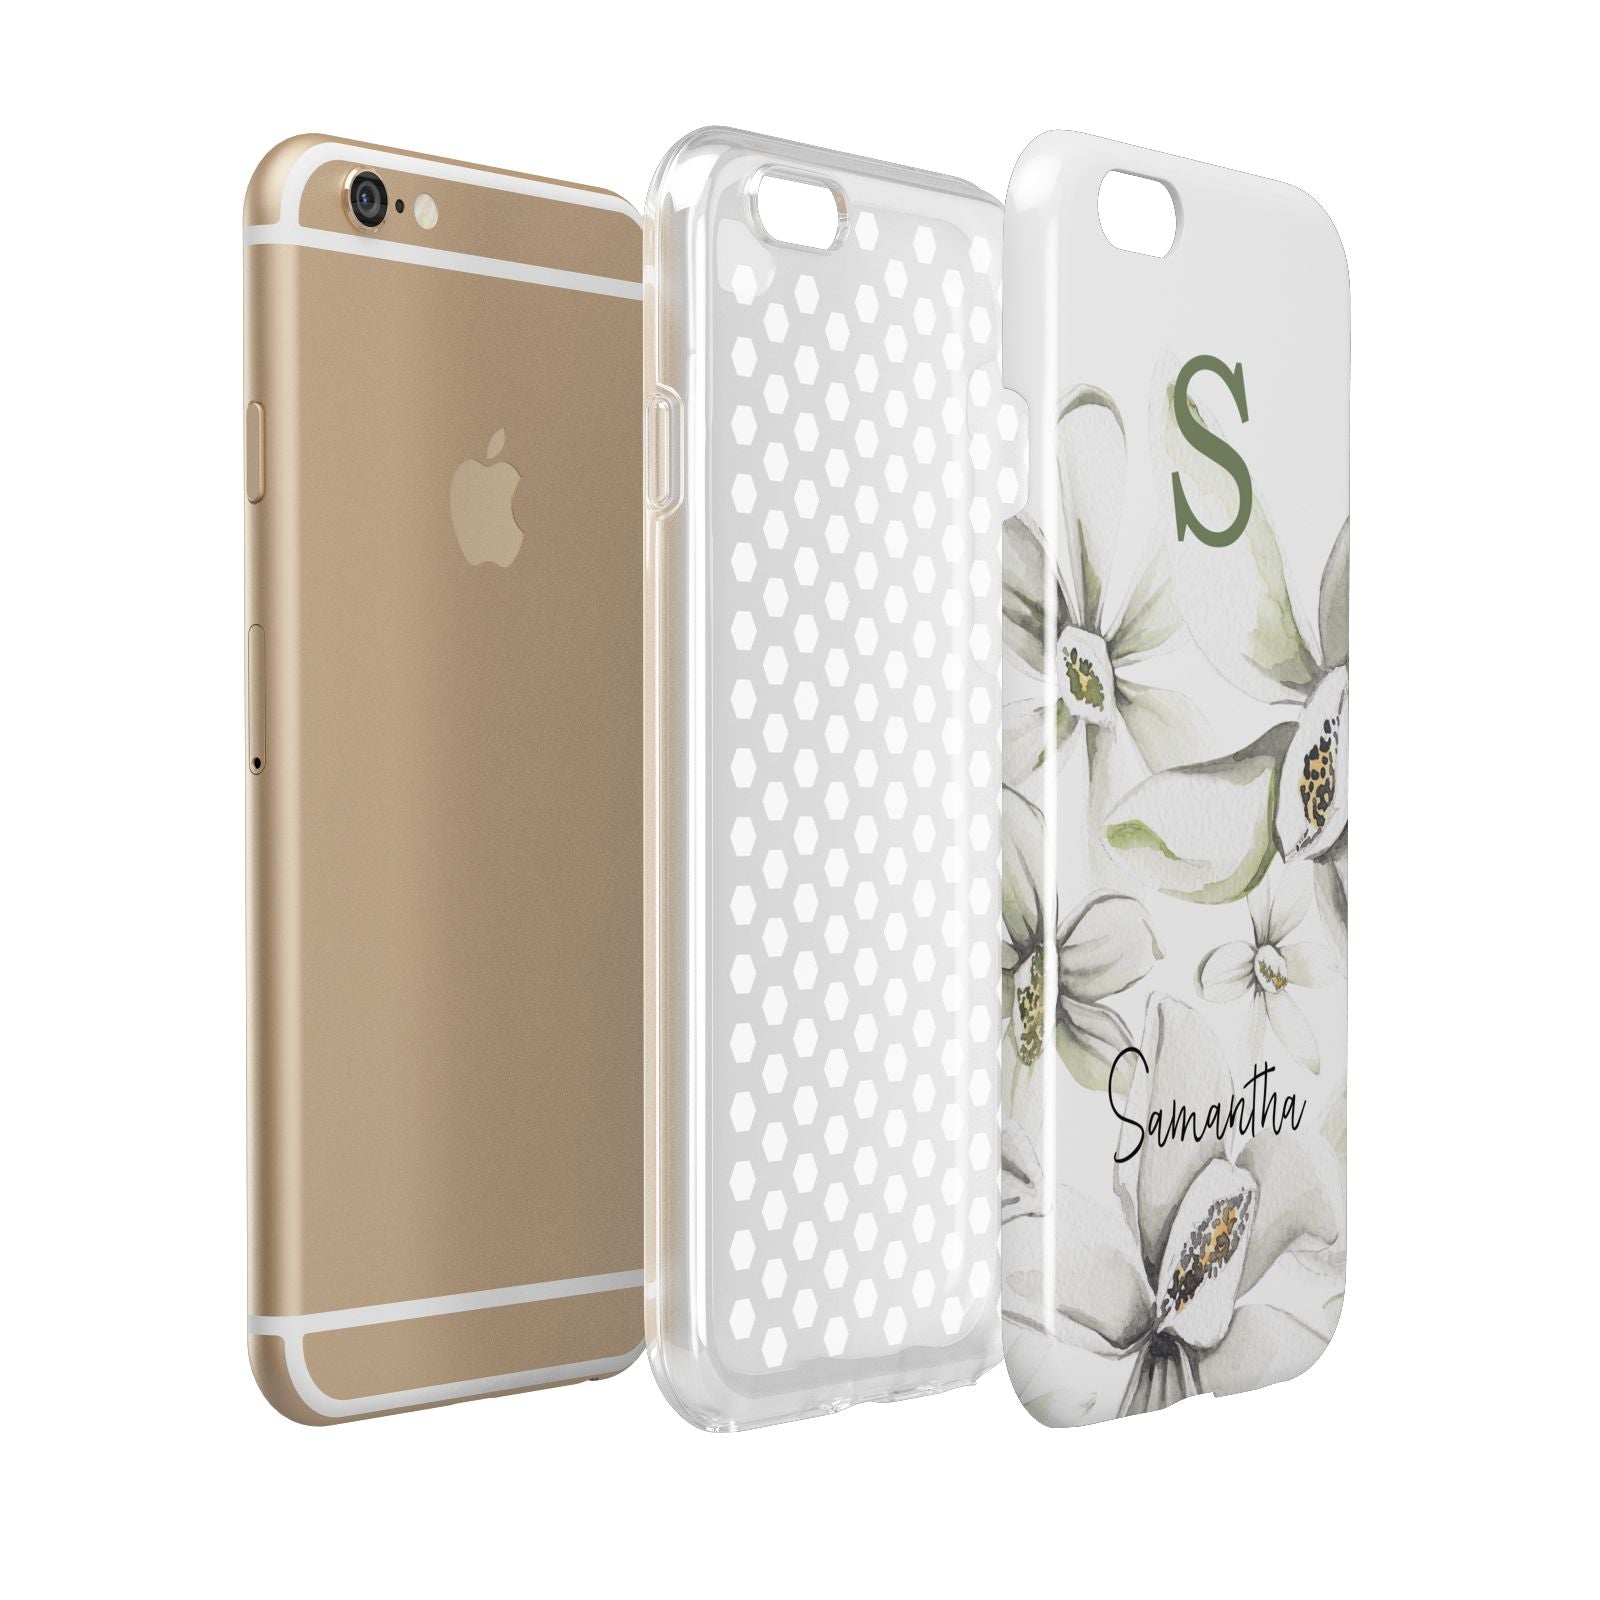 Personalised Orange Blossom Apple iPhone 6 3D Tough Case Expanded view